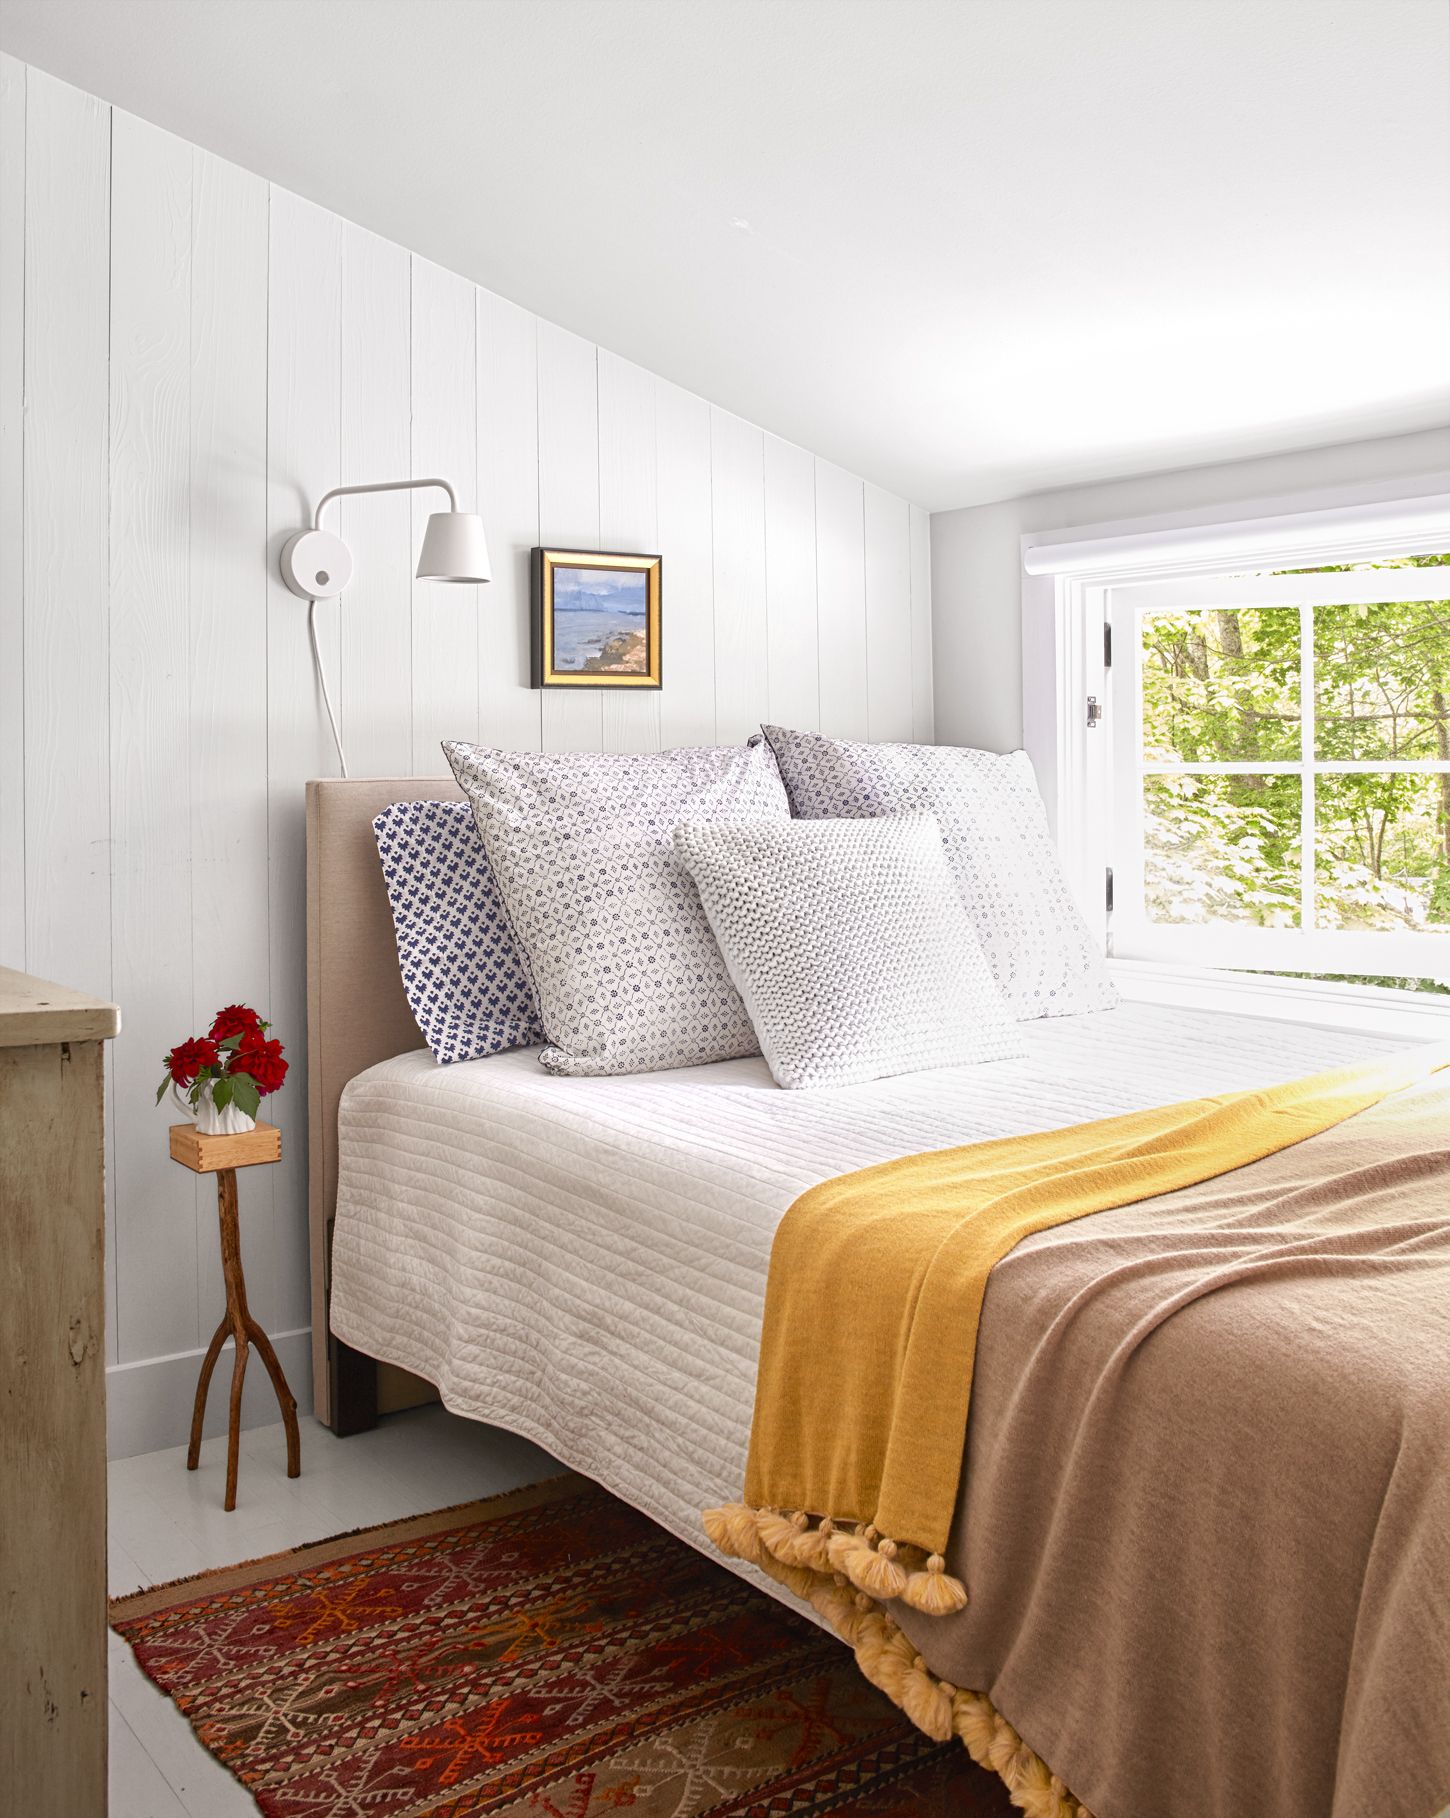 https://hips.hearstapps.com/countryliving/assets/16/32/perfect-fit-guest-room-0916.jpg